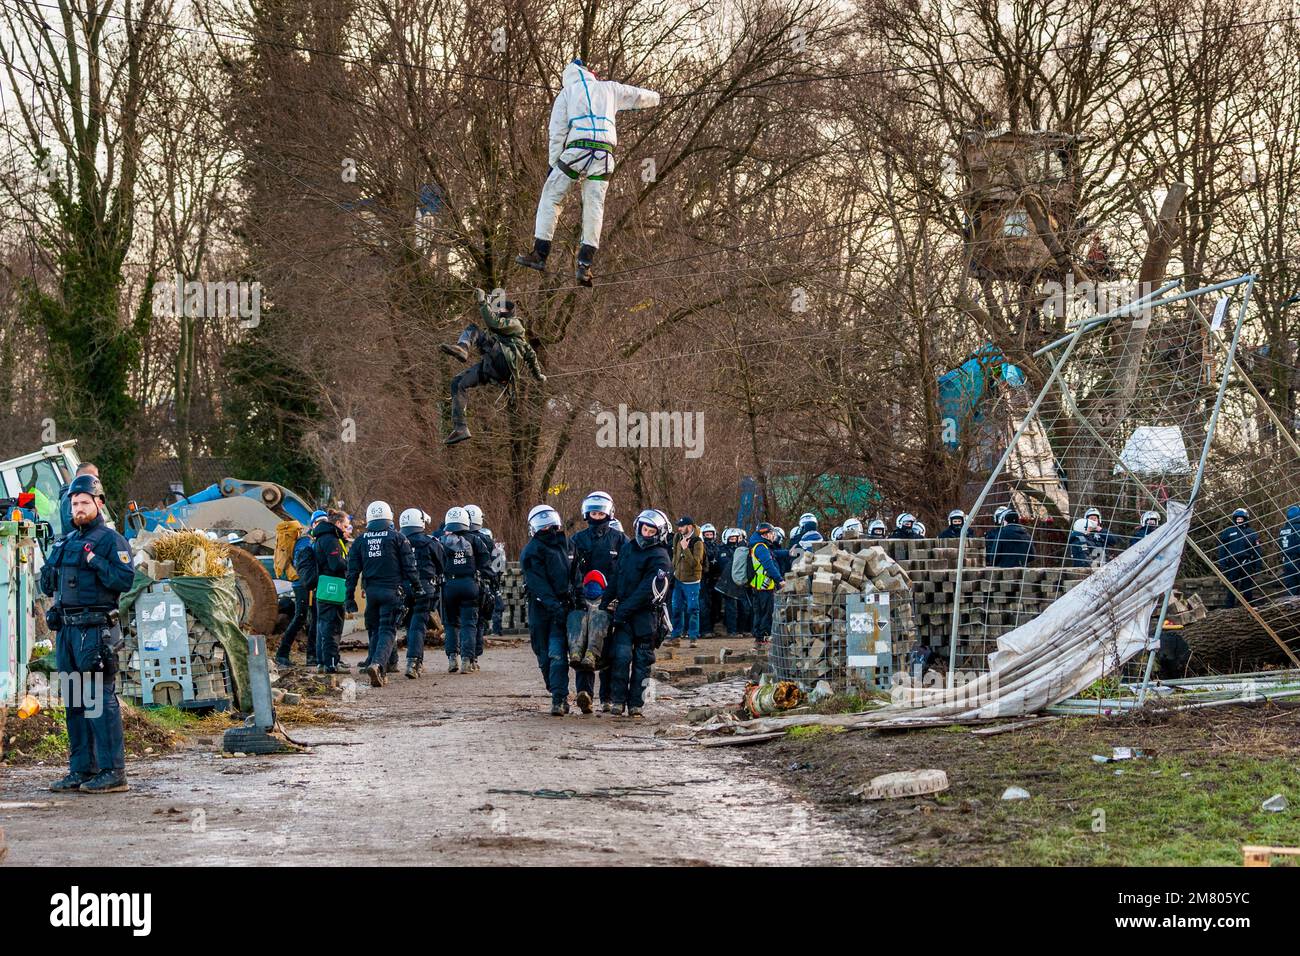 Activists have barricaded themselves in the German 'brown coal village' of Lutzerath in North Rhine-Westphalia. The activists have been occupying the village for more than two years to prevent it from being wiped off the face of the earth as agreed in a deal struck by the political. The energy company RWE mines lignite there, which activists blame for global warming and CO2 pollution. In the early morning, the police began to evacuate the village. Stock Photo